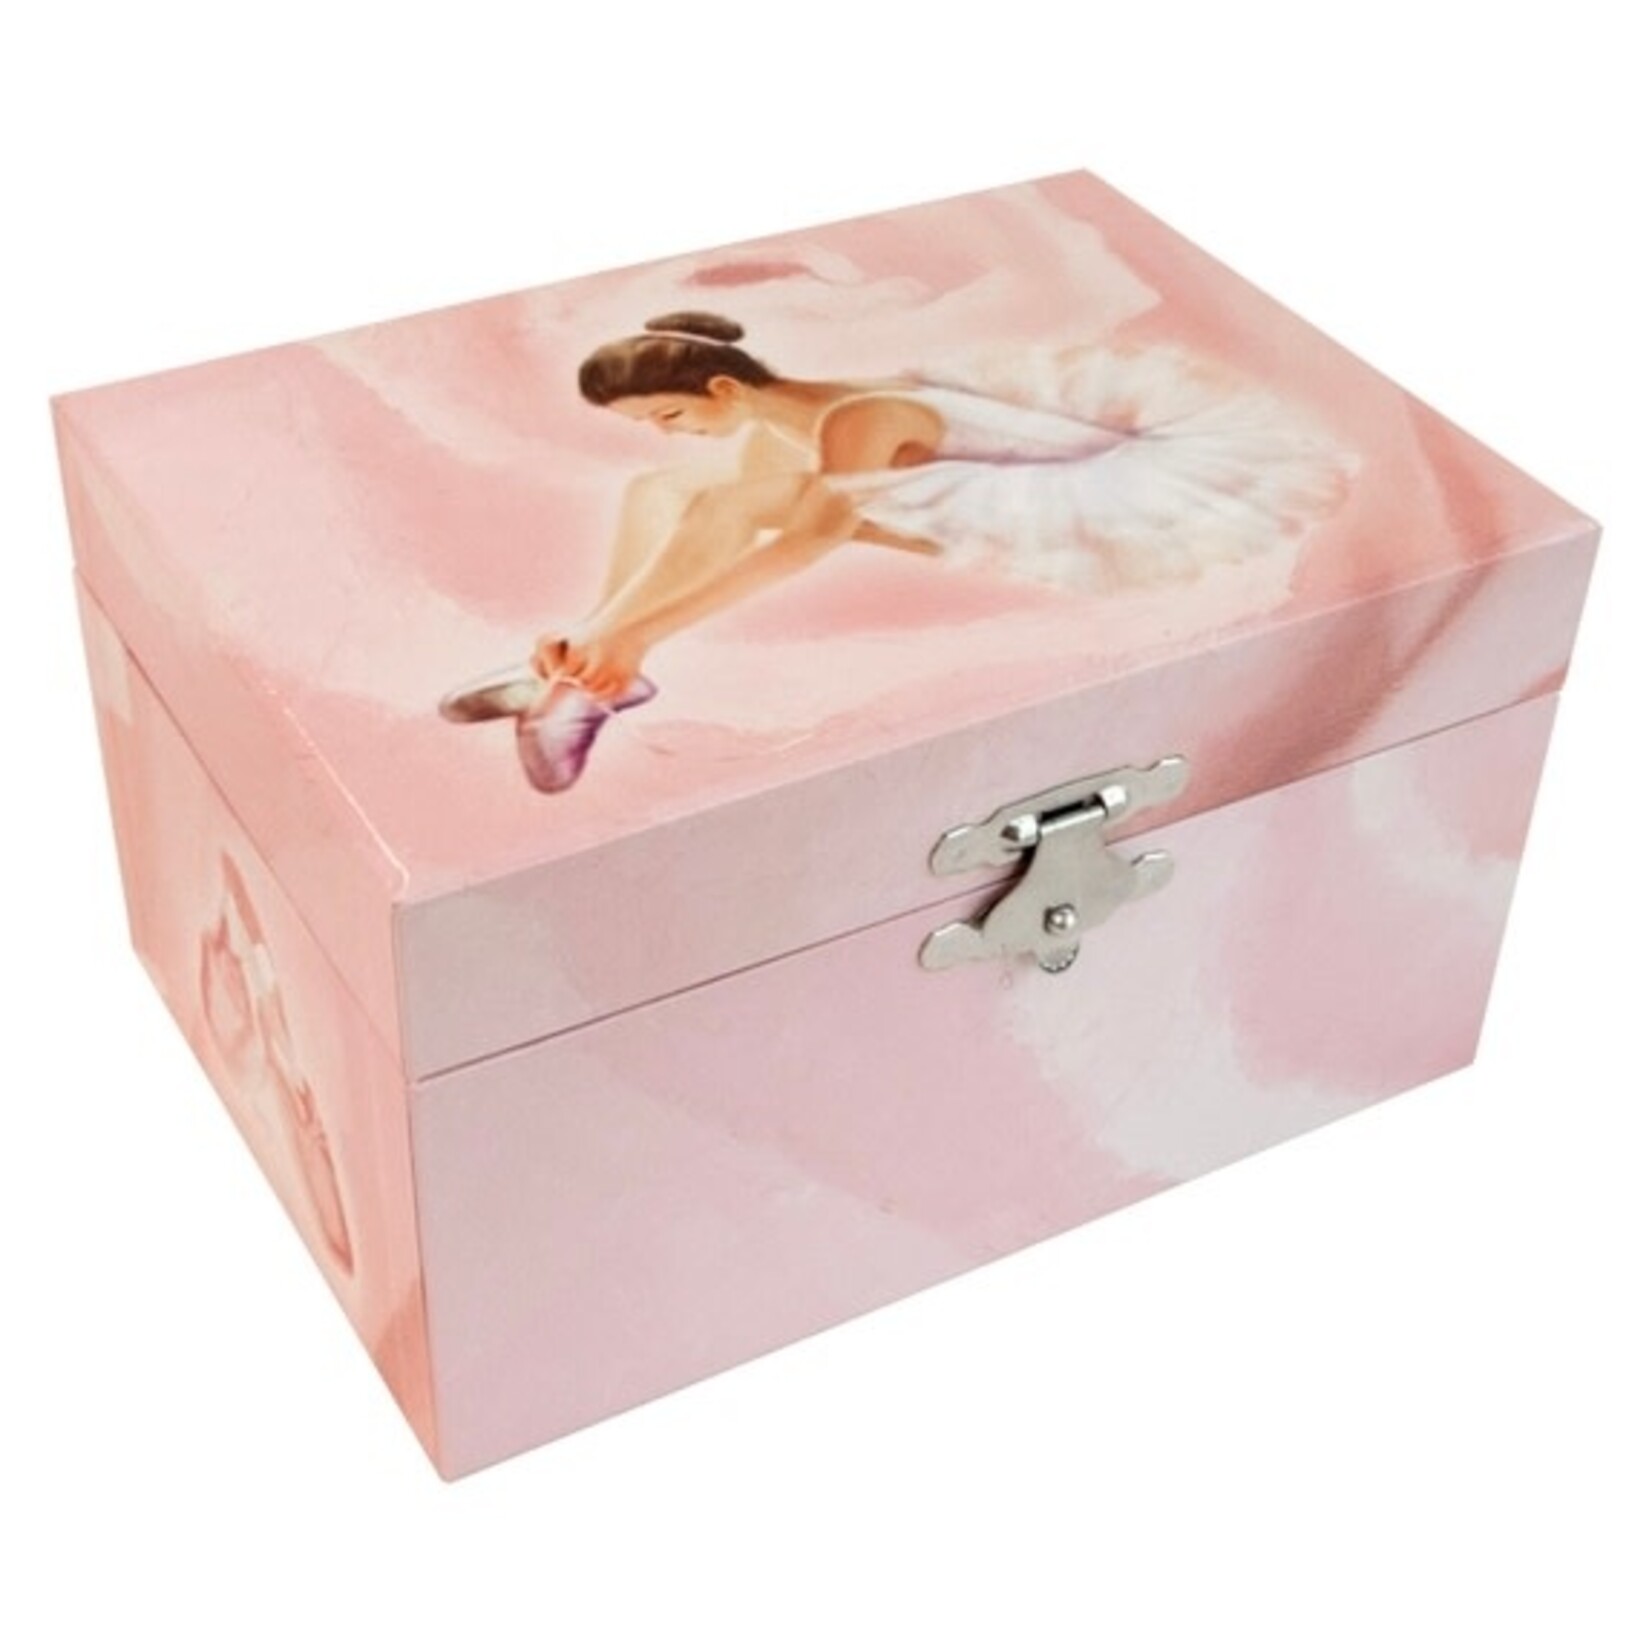 Mele and Co Mele and Co Casey Musical Ballerina Jewelry Box Waltz Flowers